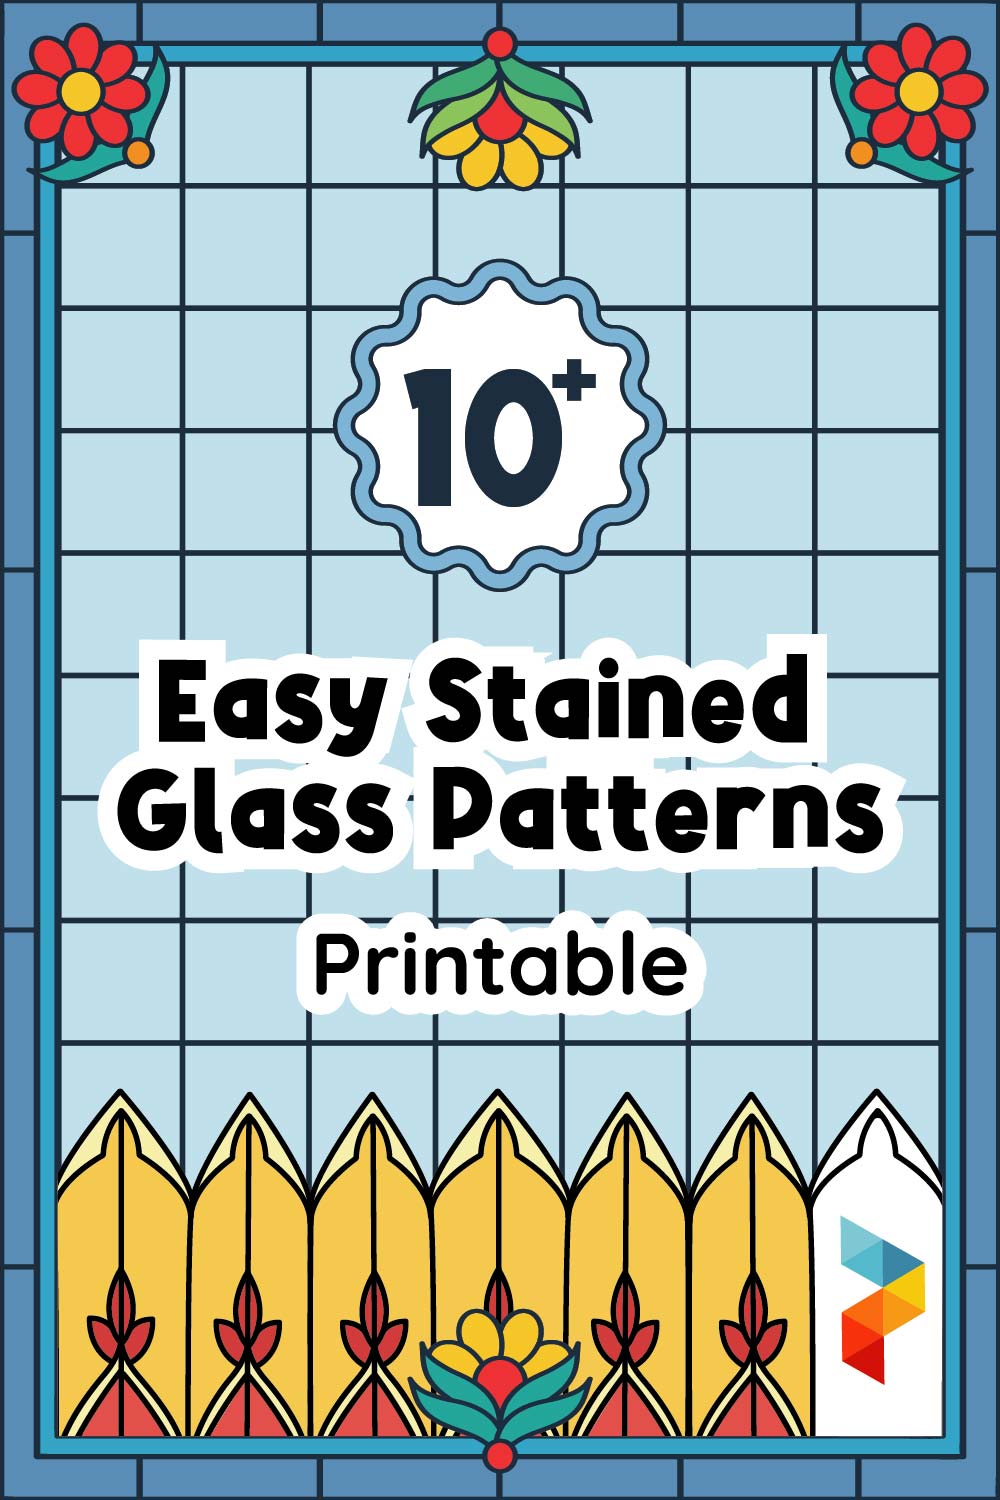 Easy Stained Glass Patterns Printable